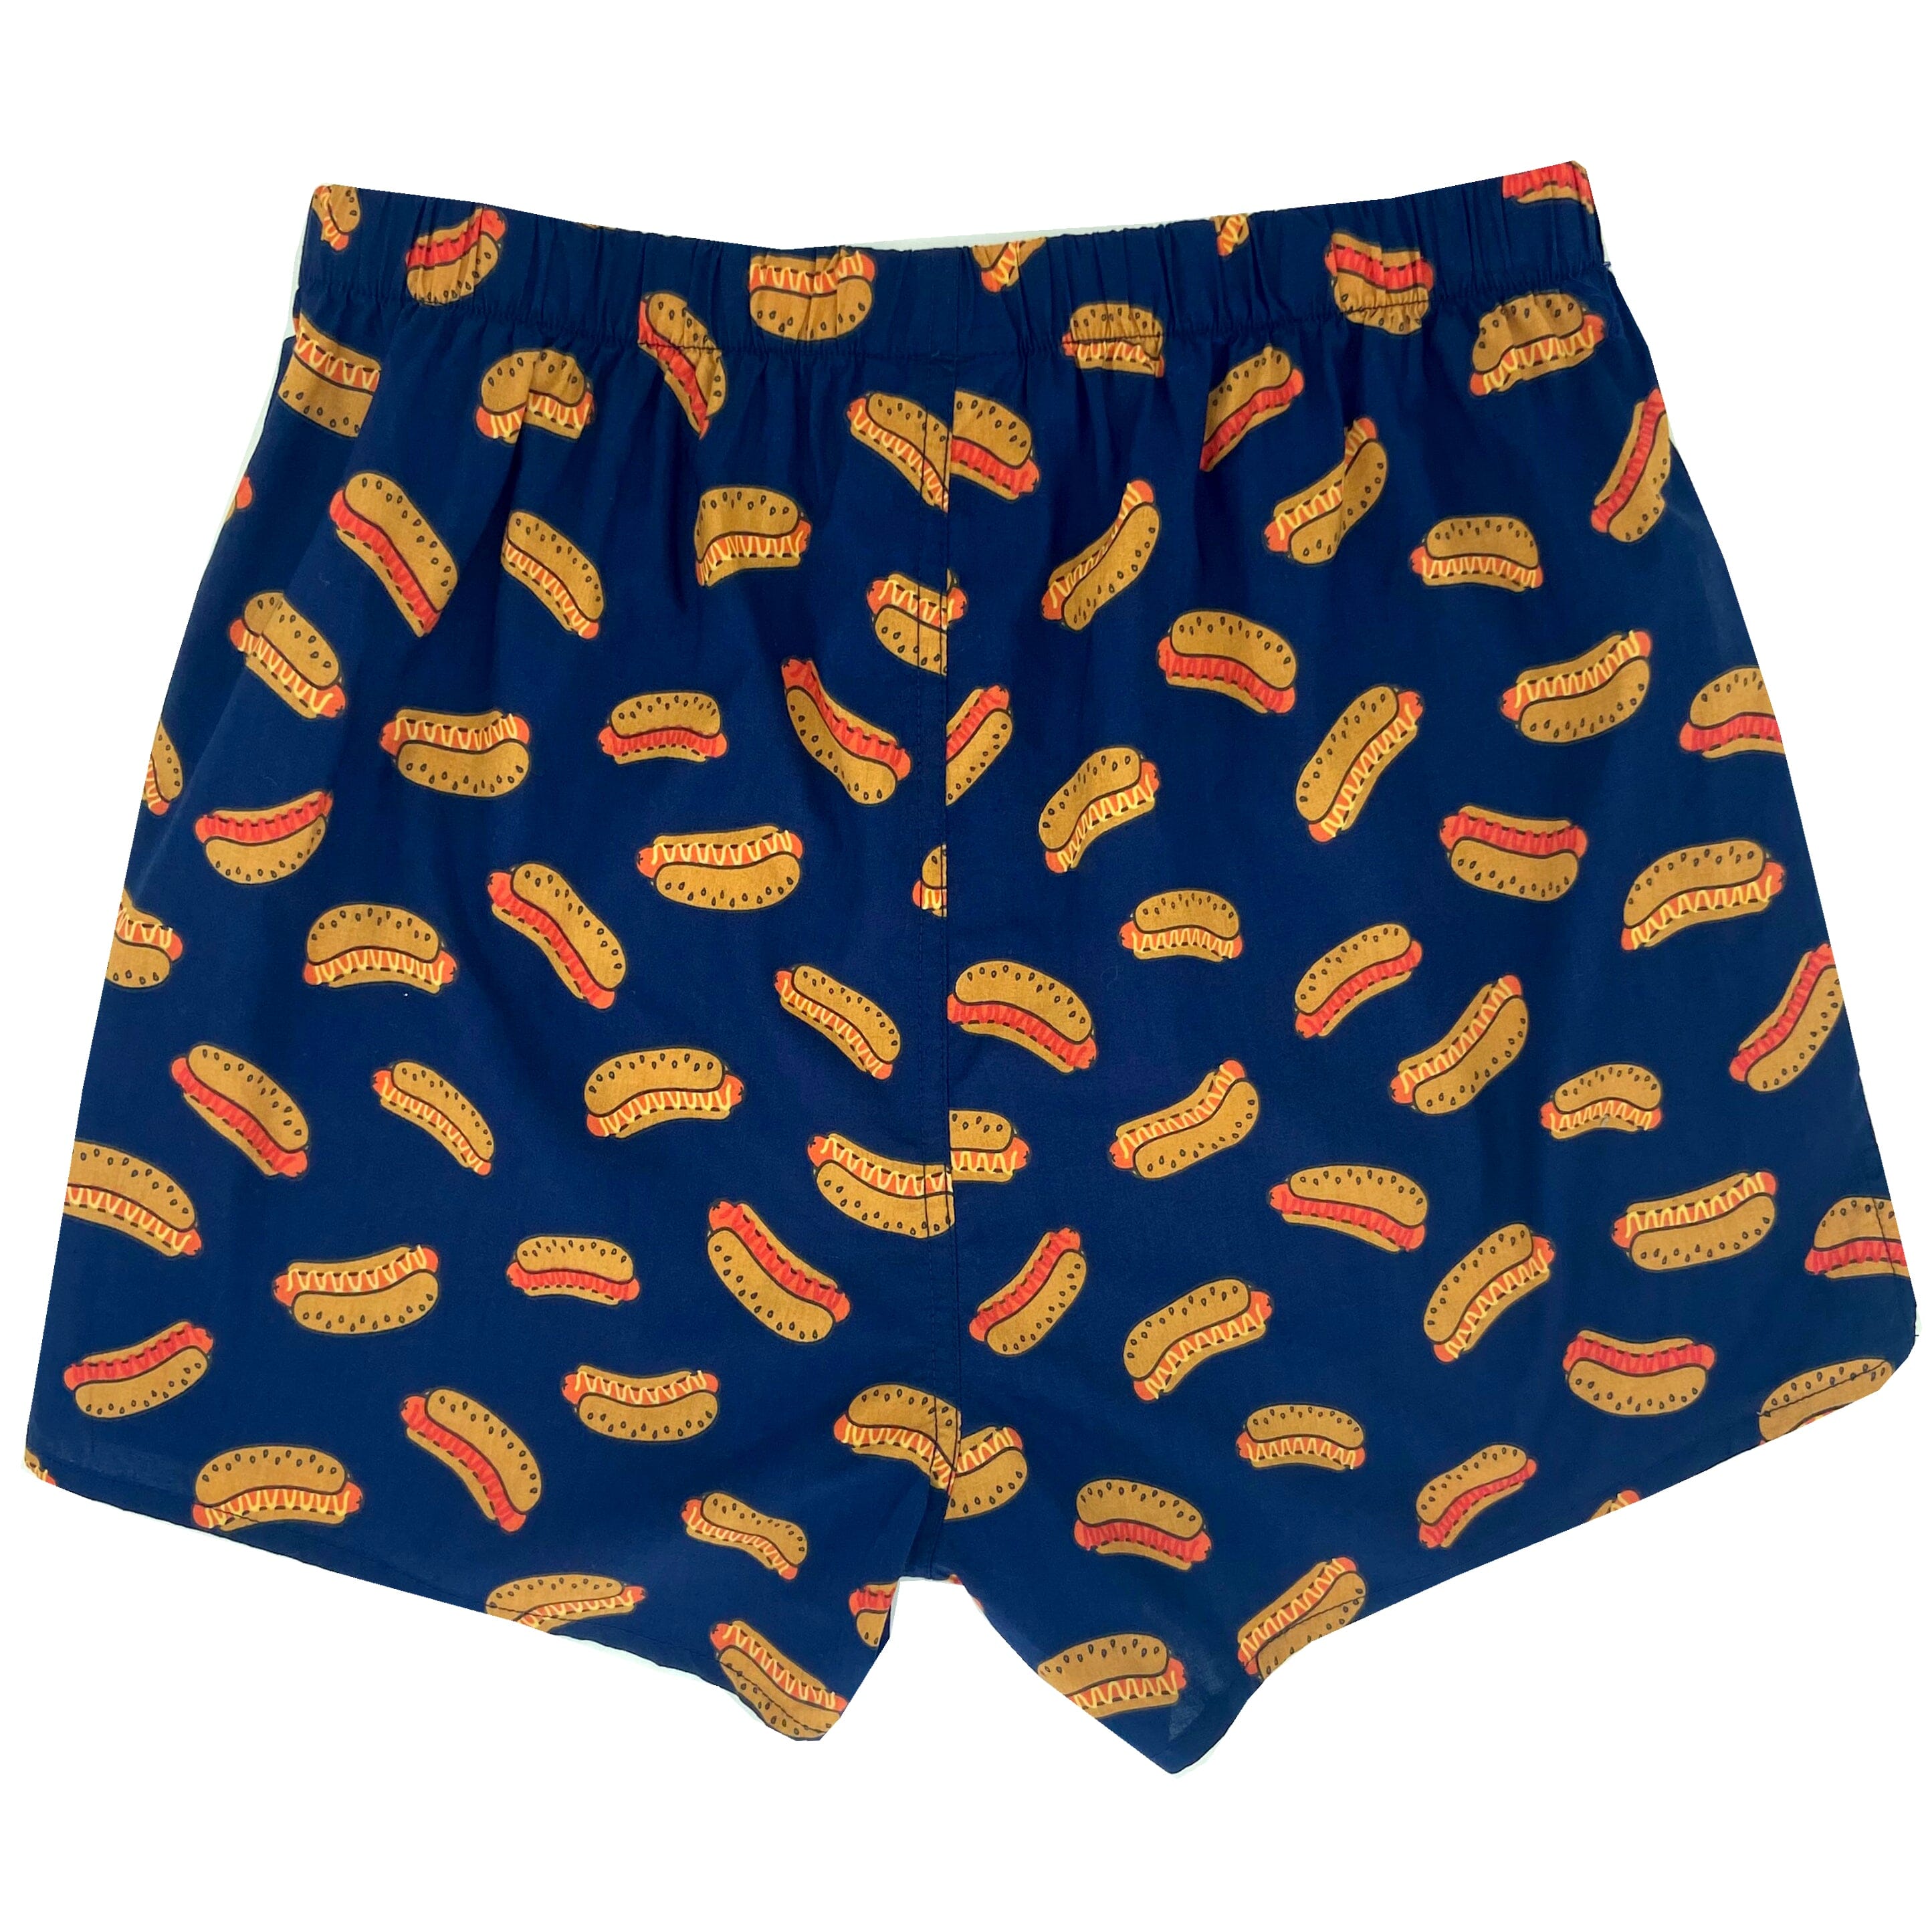 Buy Men's Foodie Themed Hotdog Buns All Over Print Cotton Boxer Shorts